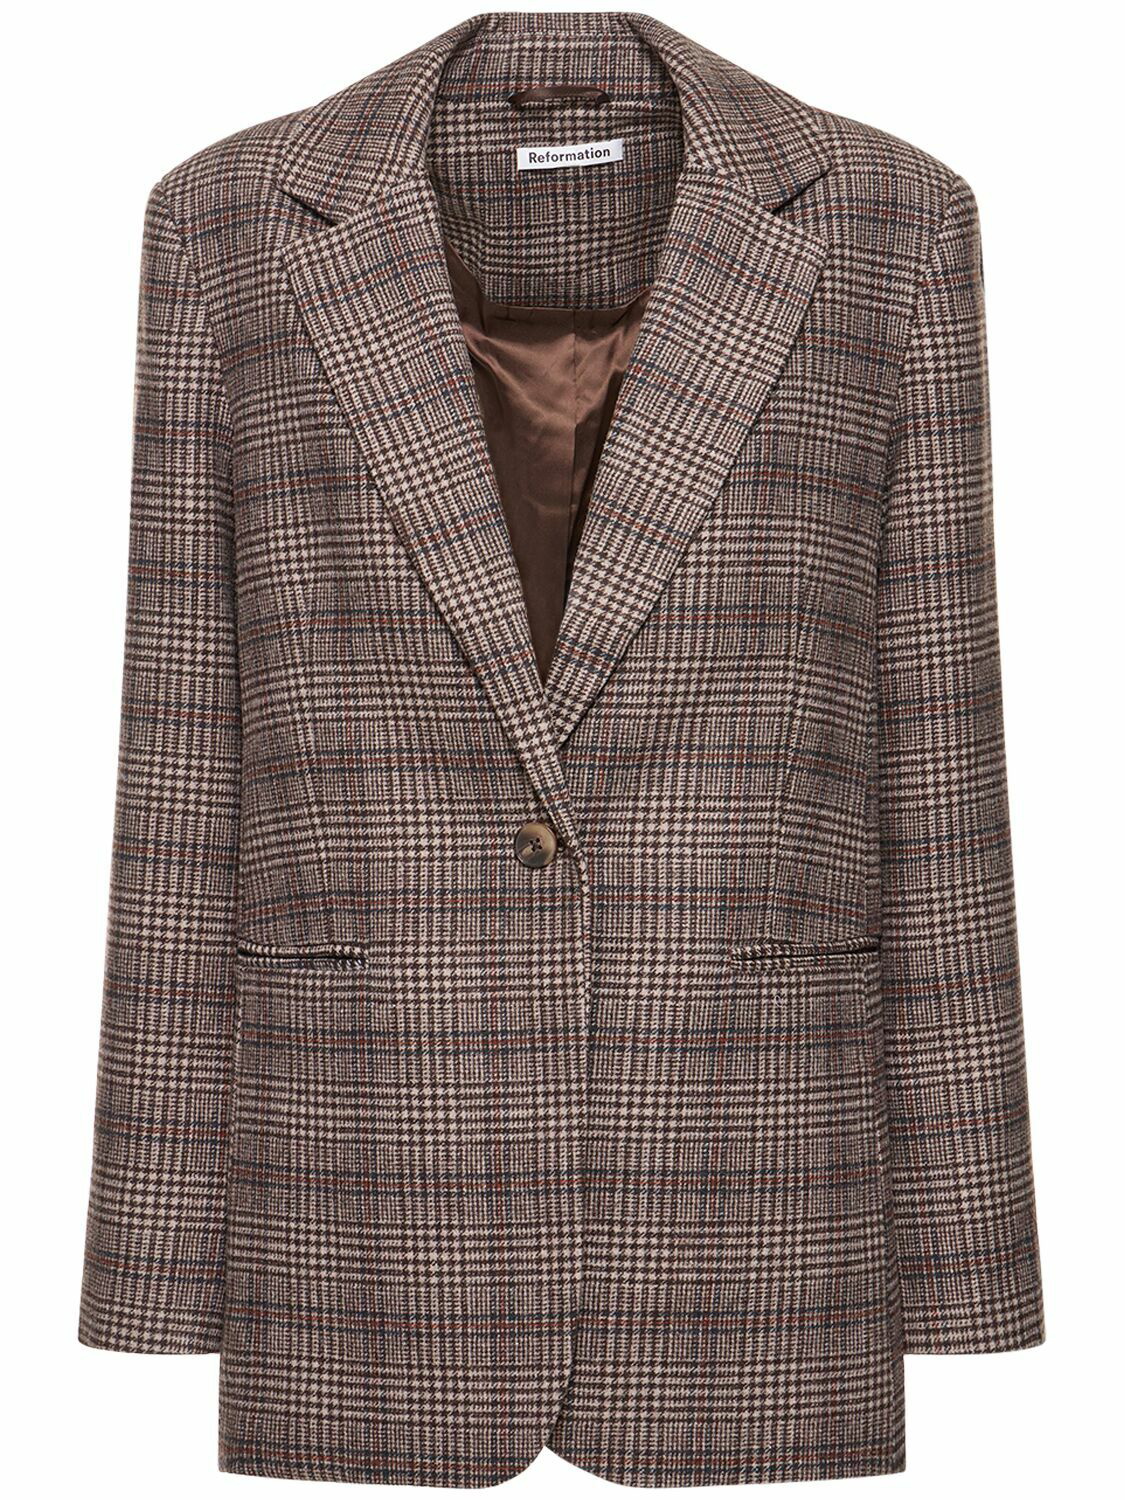 Photo: REFORMATION - The Classic Relaxed Wool Blend Blazer